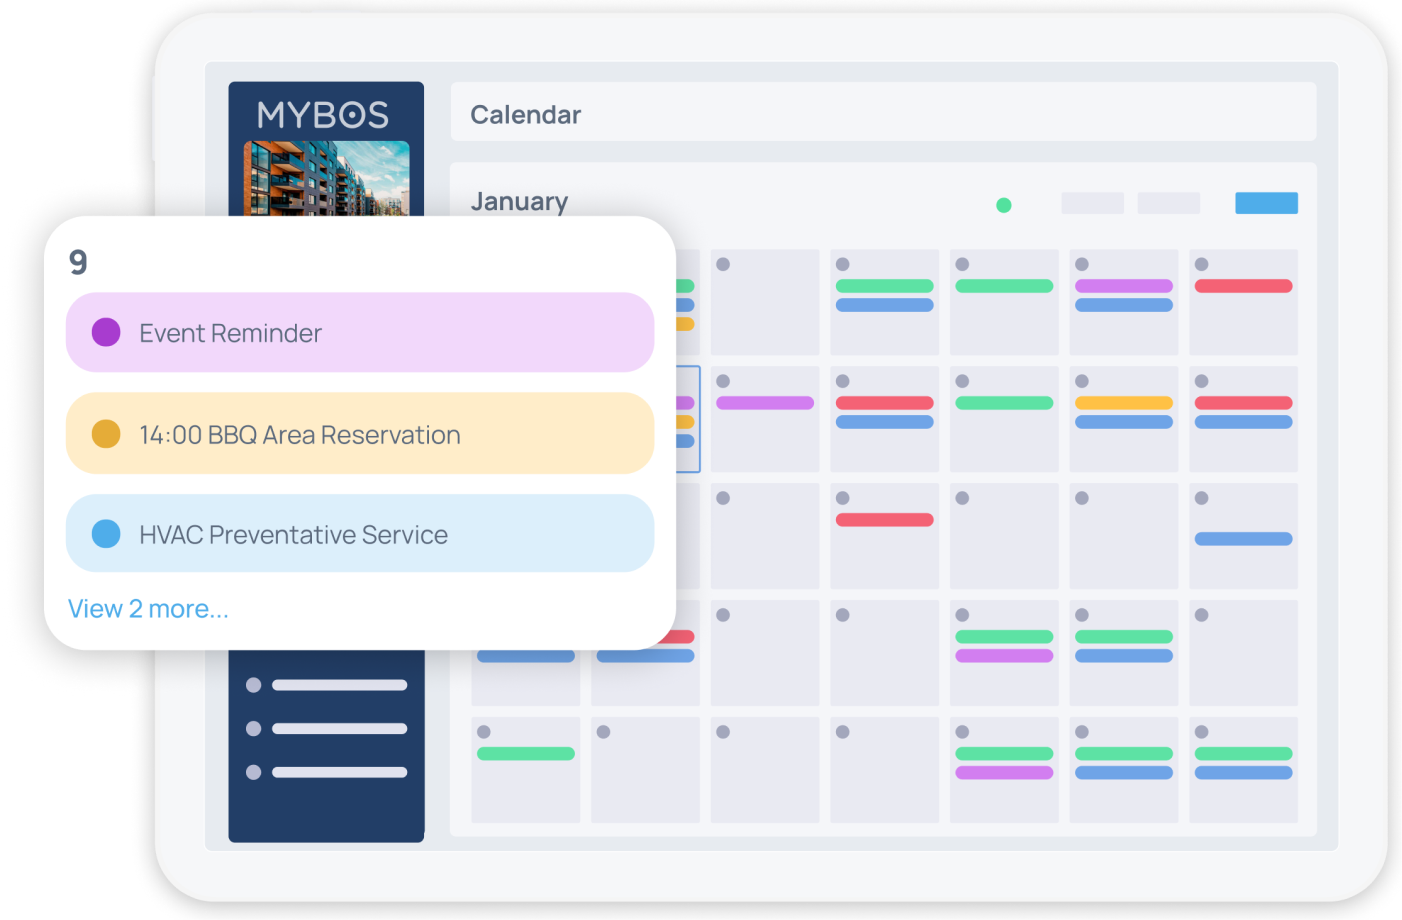 The Calendar functions allows for the Building/Facility Manager to quickly view their daily tasks and reminders in addition to being able to view preventative maintenance and more